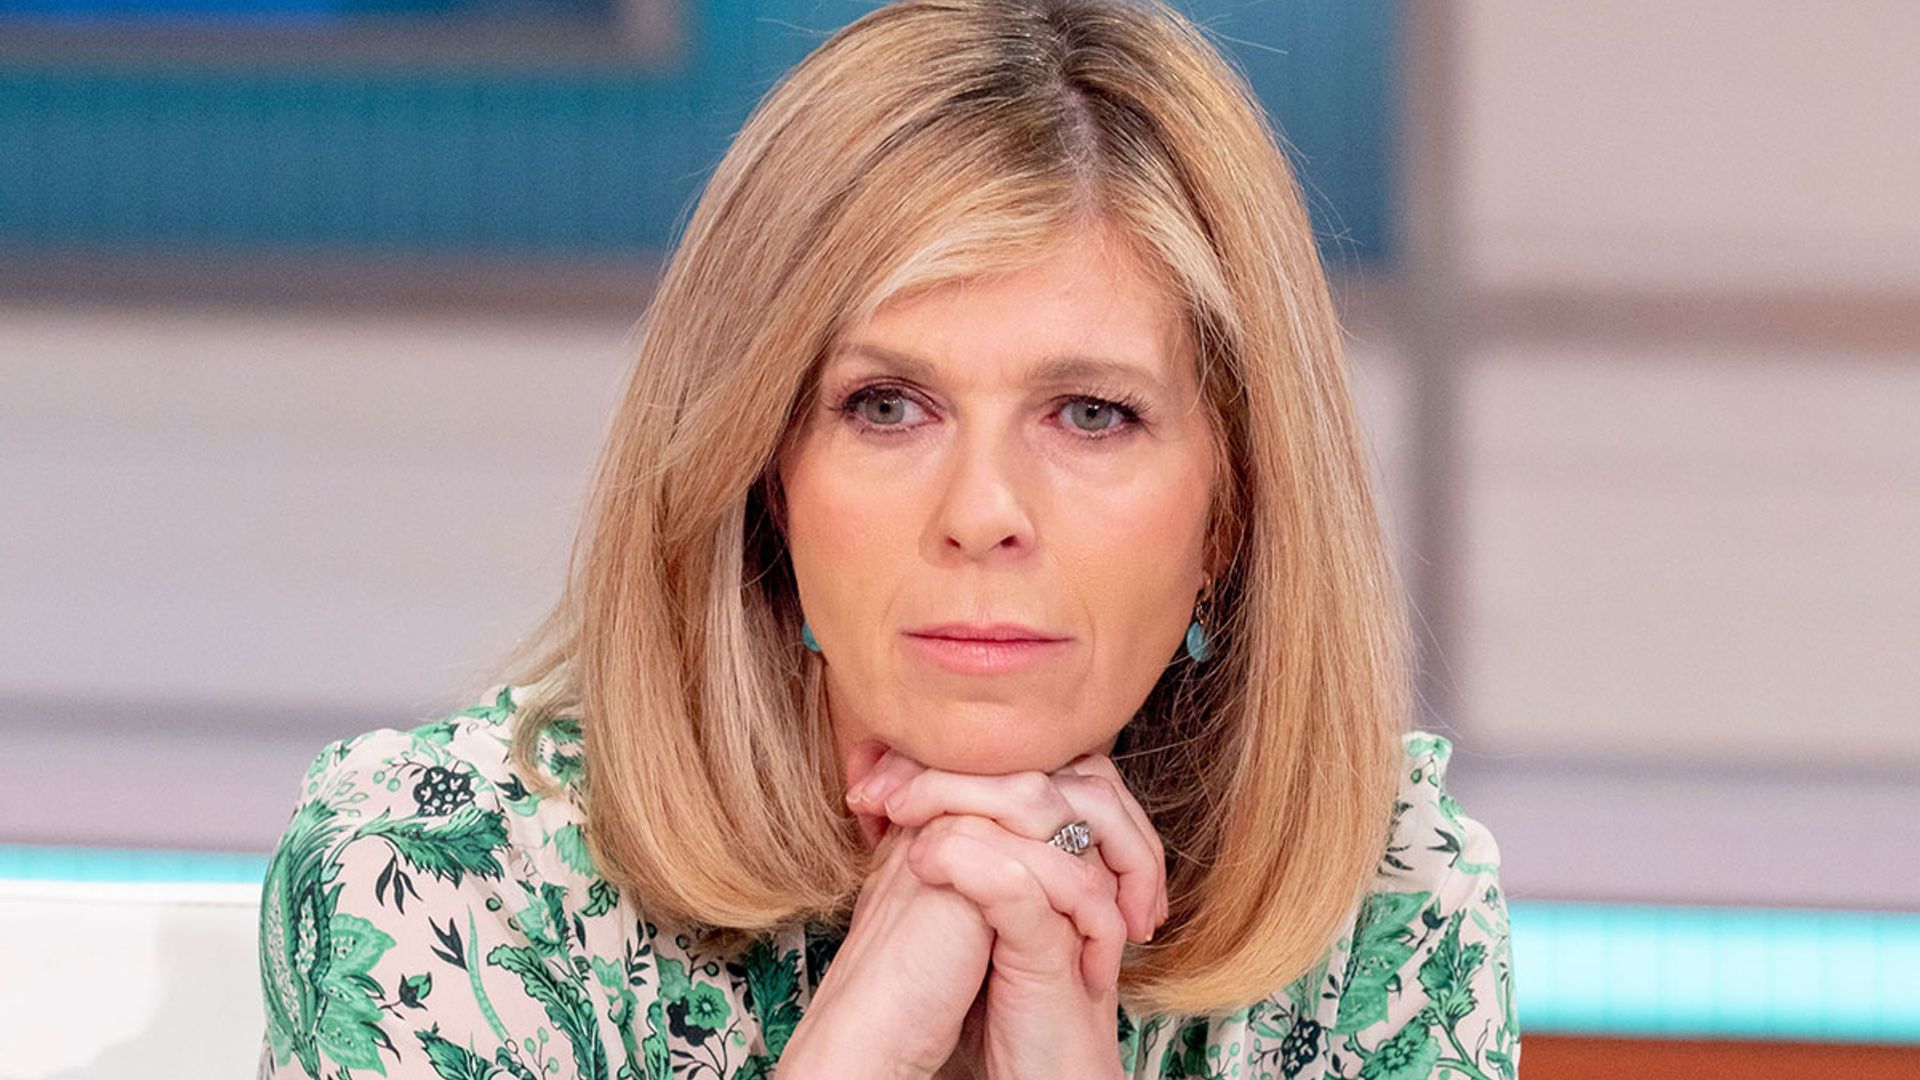 Kate Garraway expresses her gratitude in emotional post amid husband's COVID battle